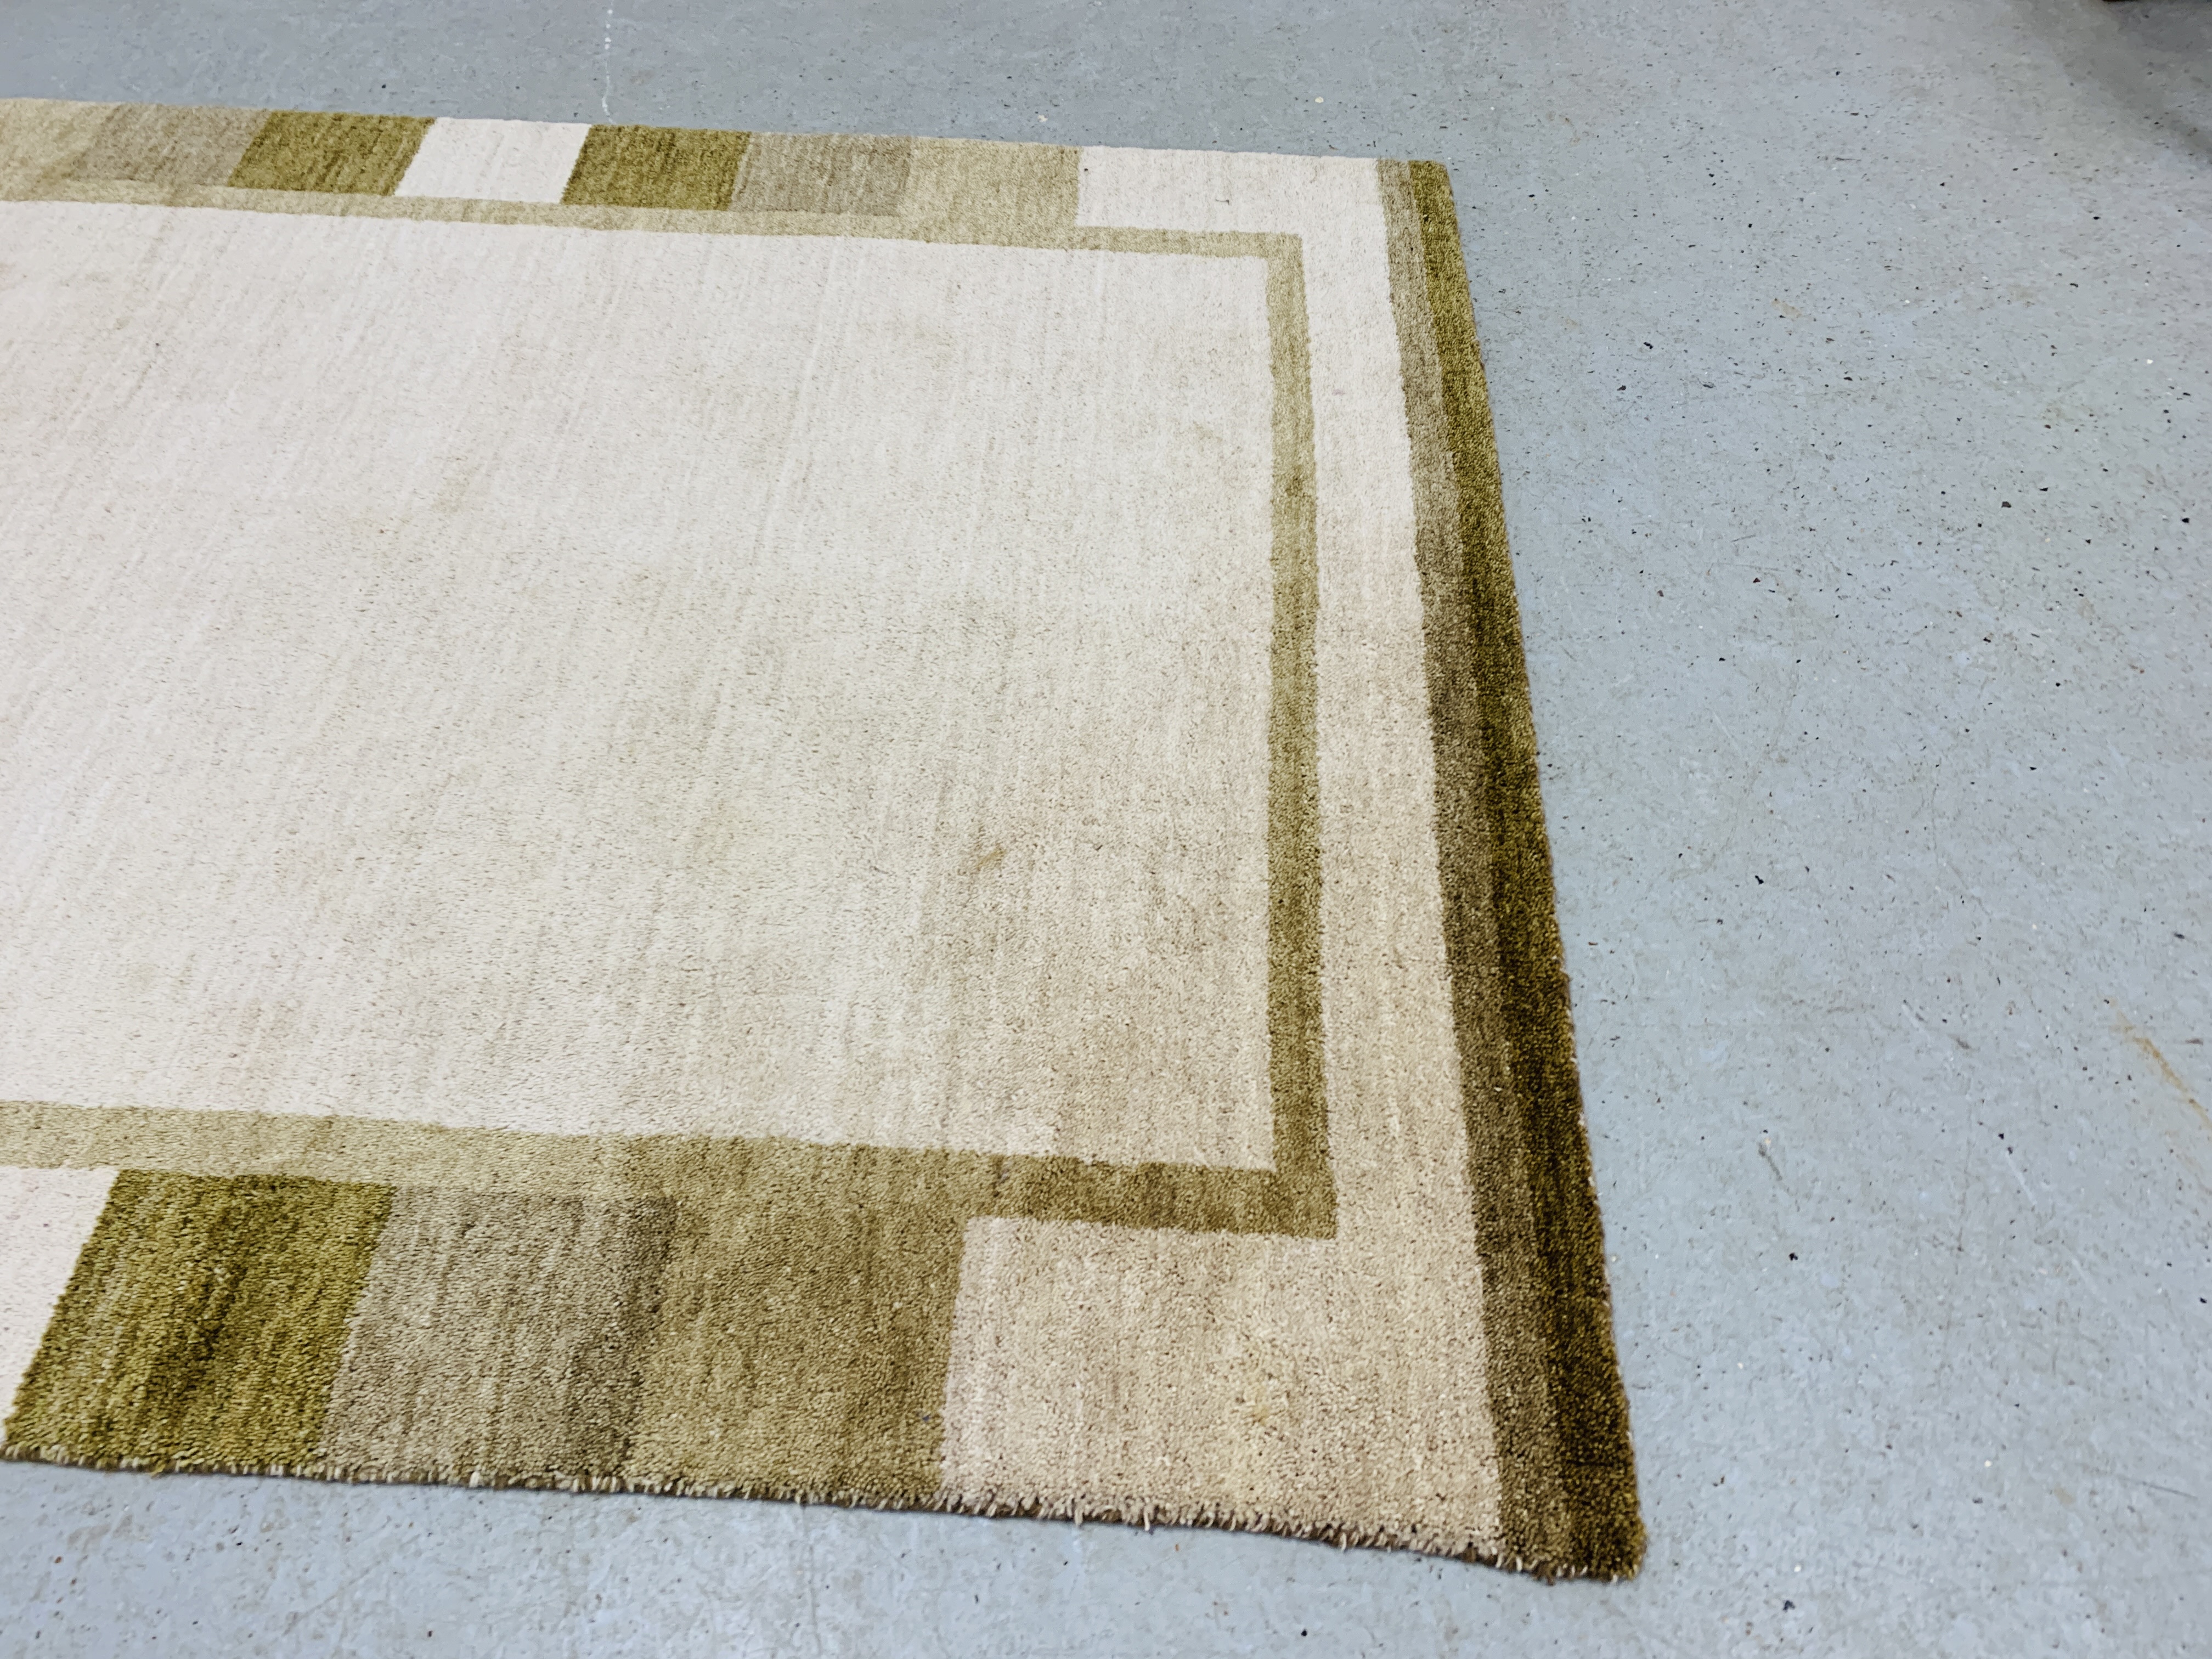 A LUXOR LIVING TEPPICH ROMA HAND KNOTTED 100% WOOL BEIGE PATTERNED CARPET 140 X 200CM. - Image 4 of 6